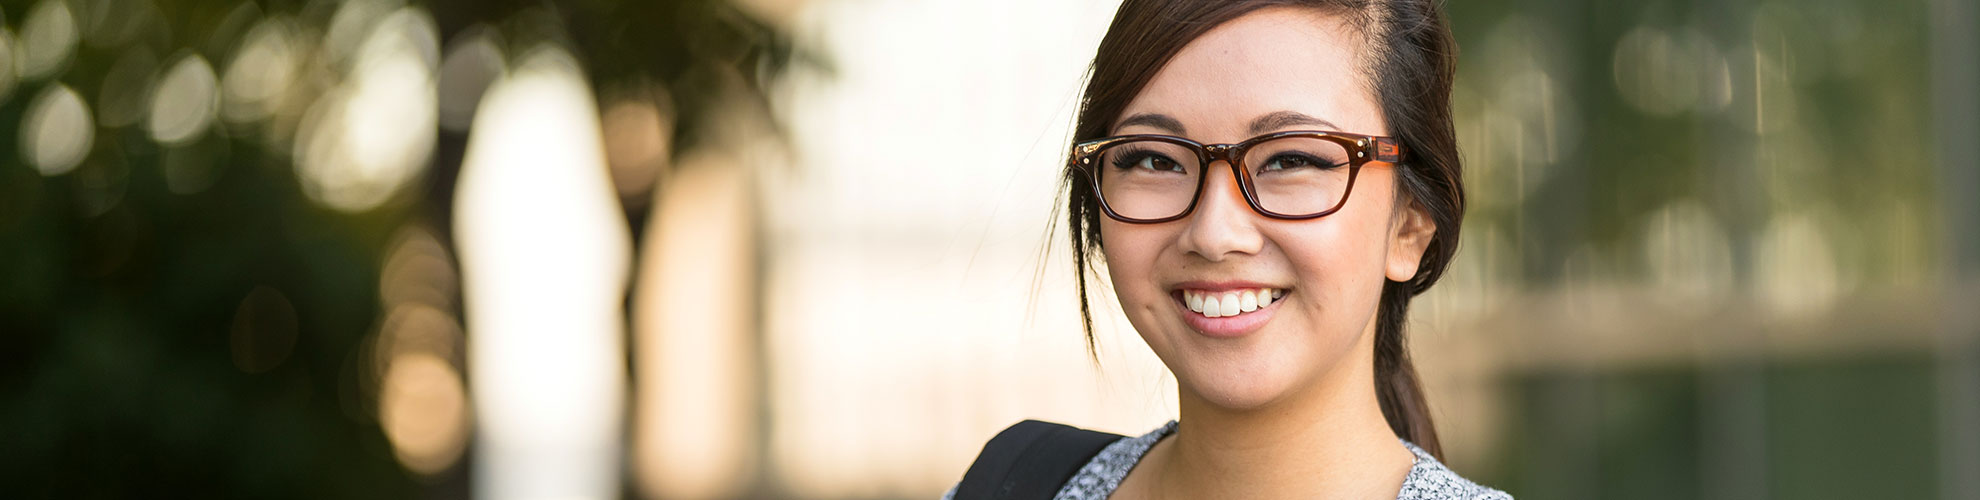 Young woman smiling outdoors wearing glasses